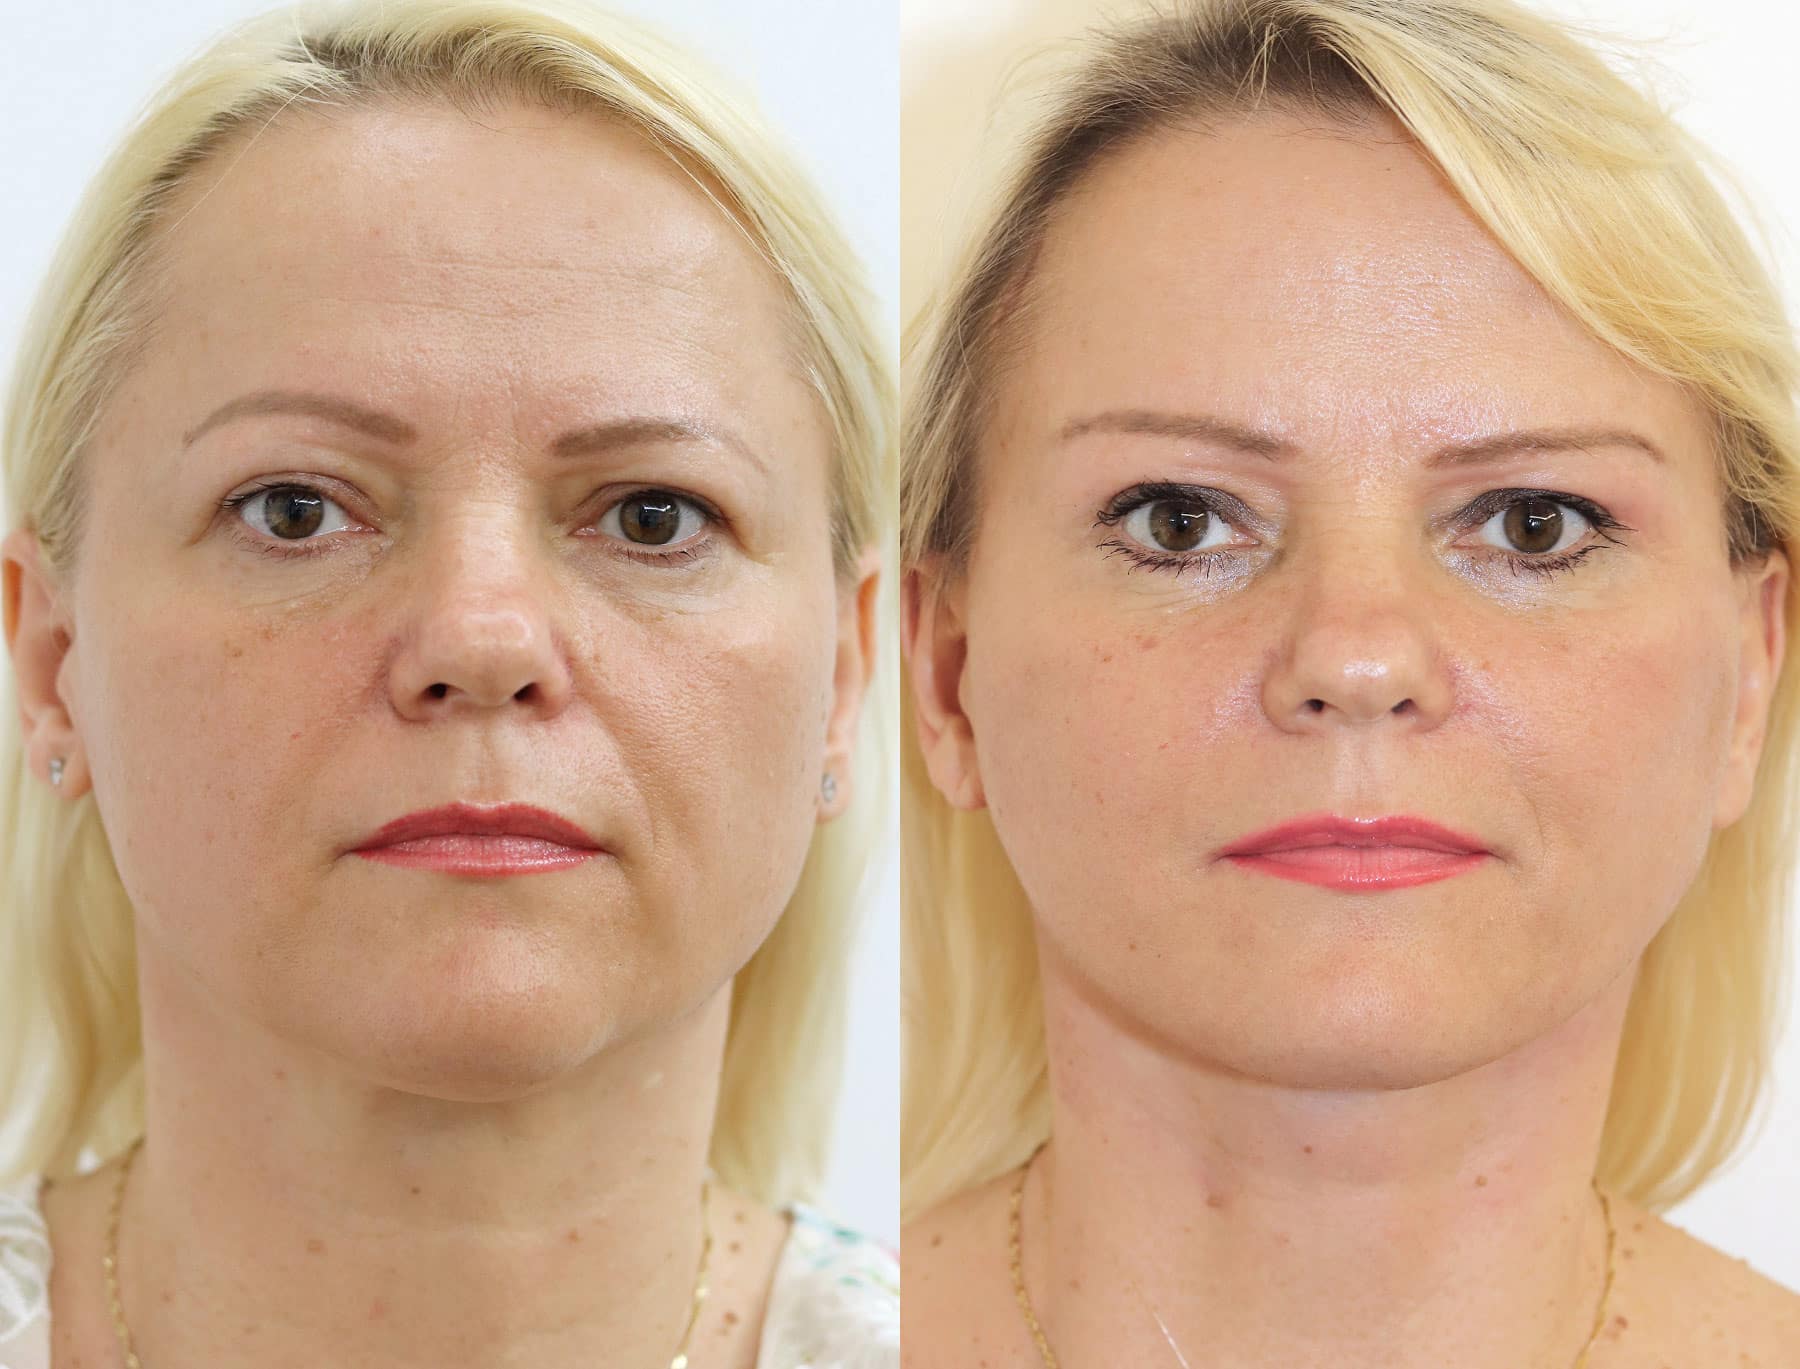 Dermal fillers help with maintenance after a facelift.